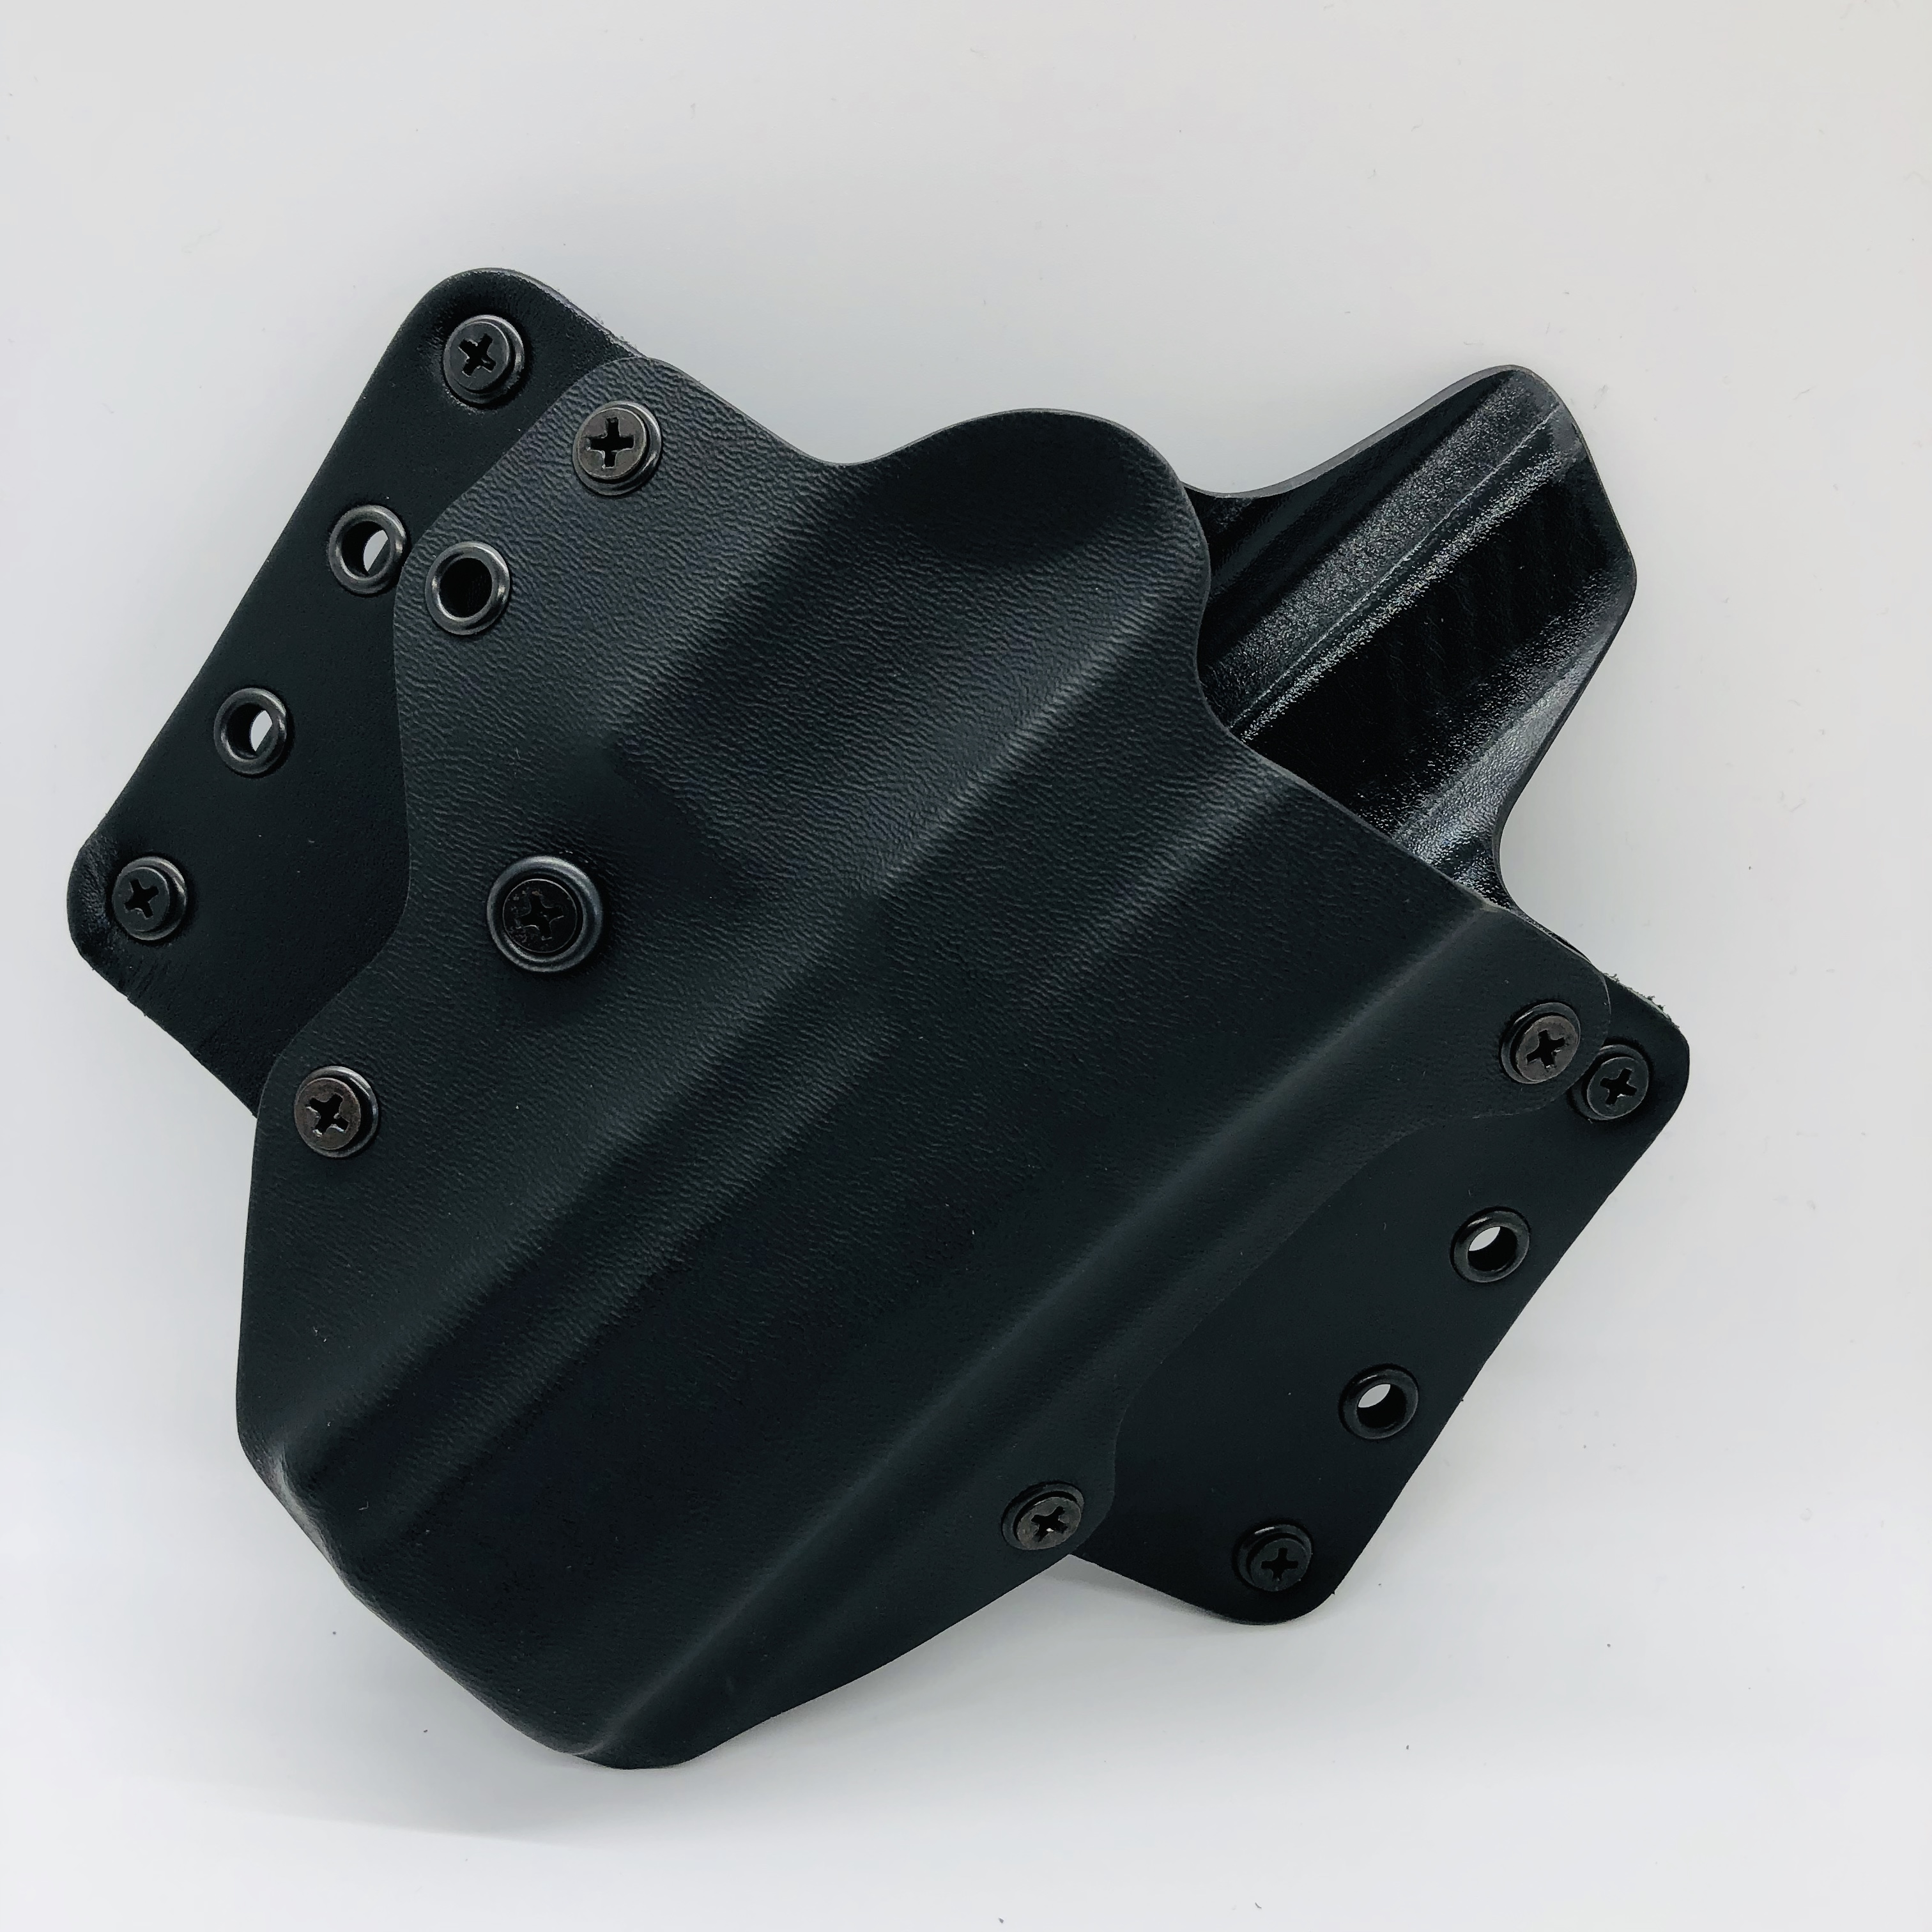 Blackpoint Tactical 102637 Leather Wing 1.75" Holster For SIG P320F BLK Blackpoint Tactical 102637 Leather Wing 1.75" Holster For SIG P320F BLK